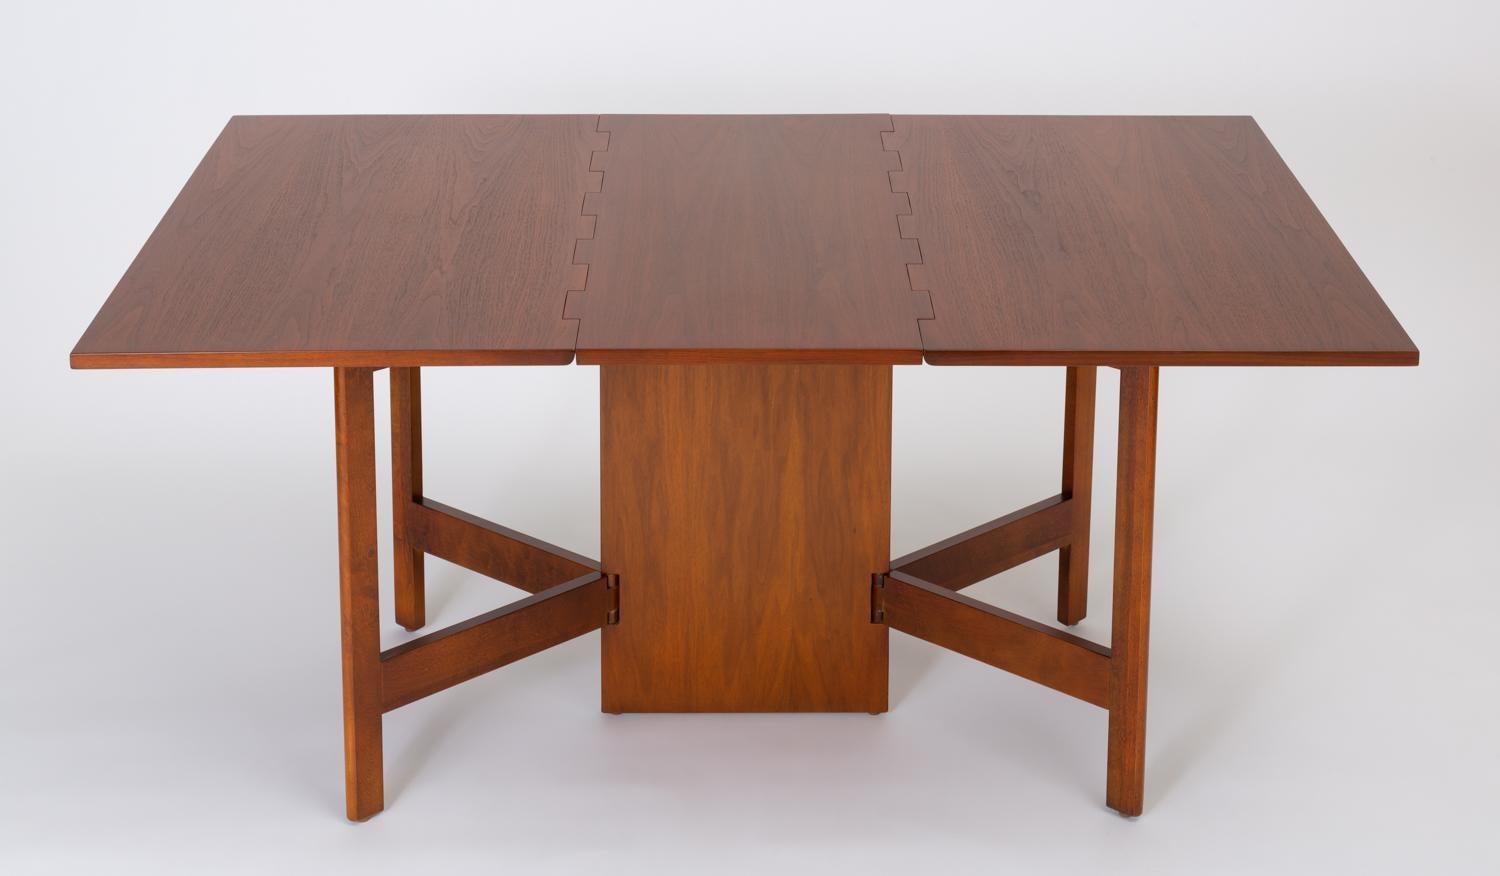 George Nelson’s 1947 design for Herman Miller was an updated take on the classic gateleg table. The central panel support has four rotating legs that allow for more stability than the traditional two-leg design. The innovative box-jointed hinge